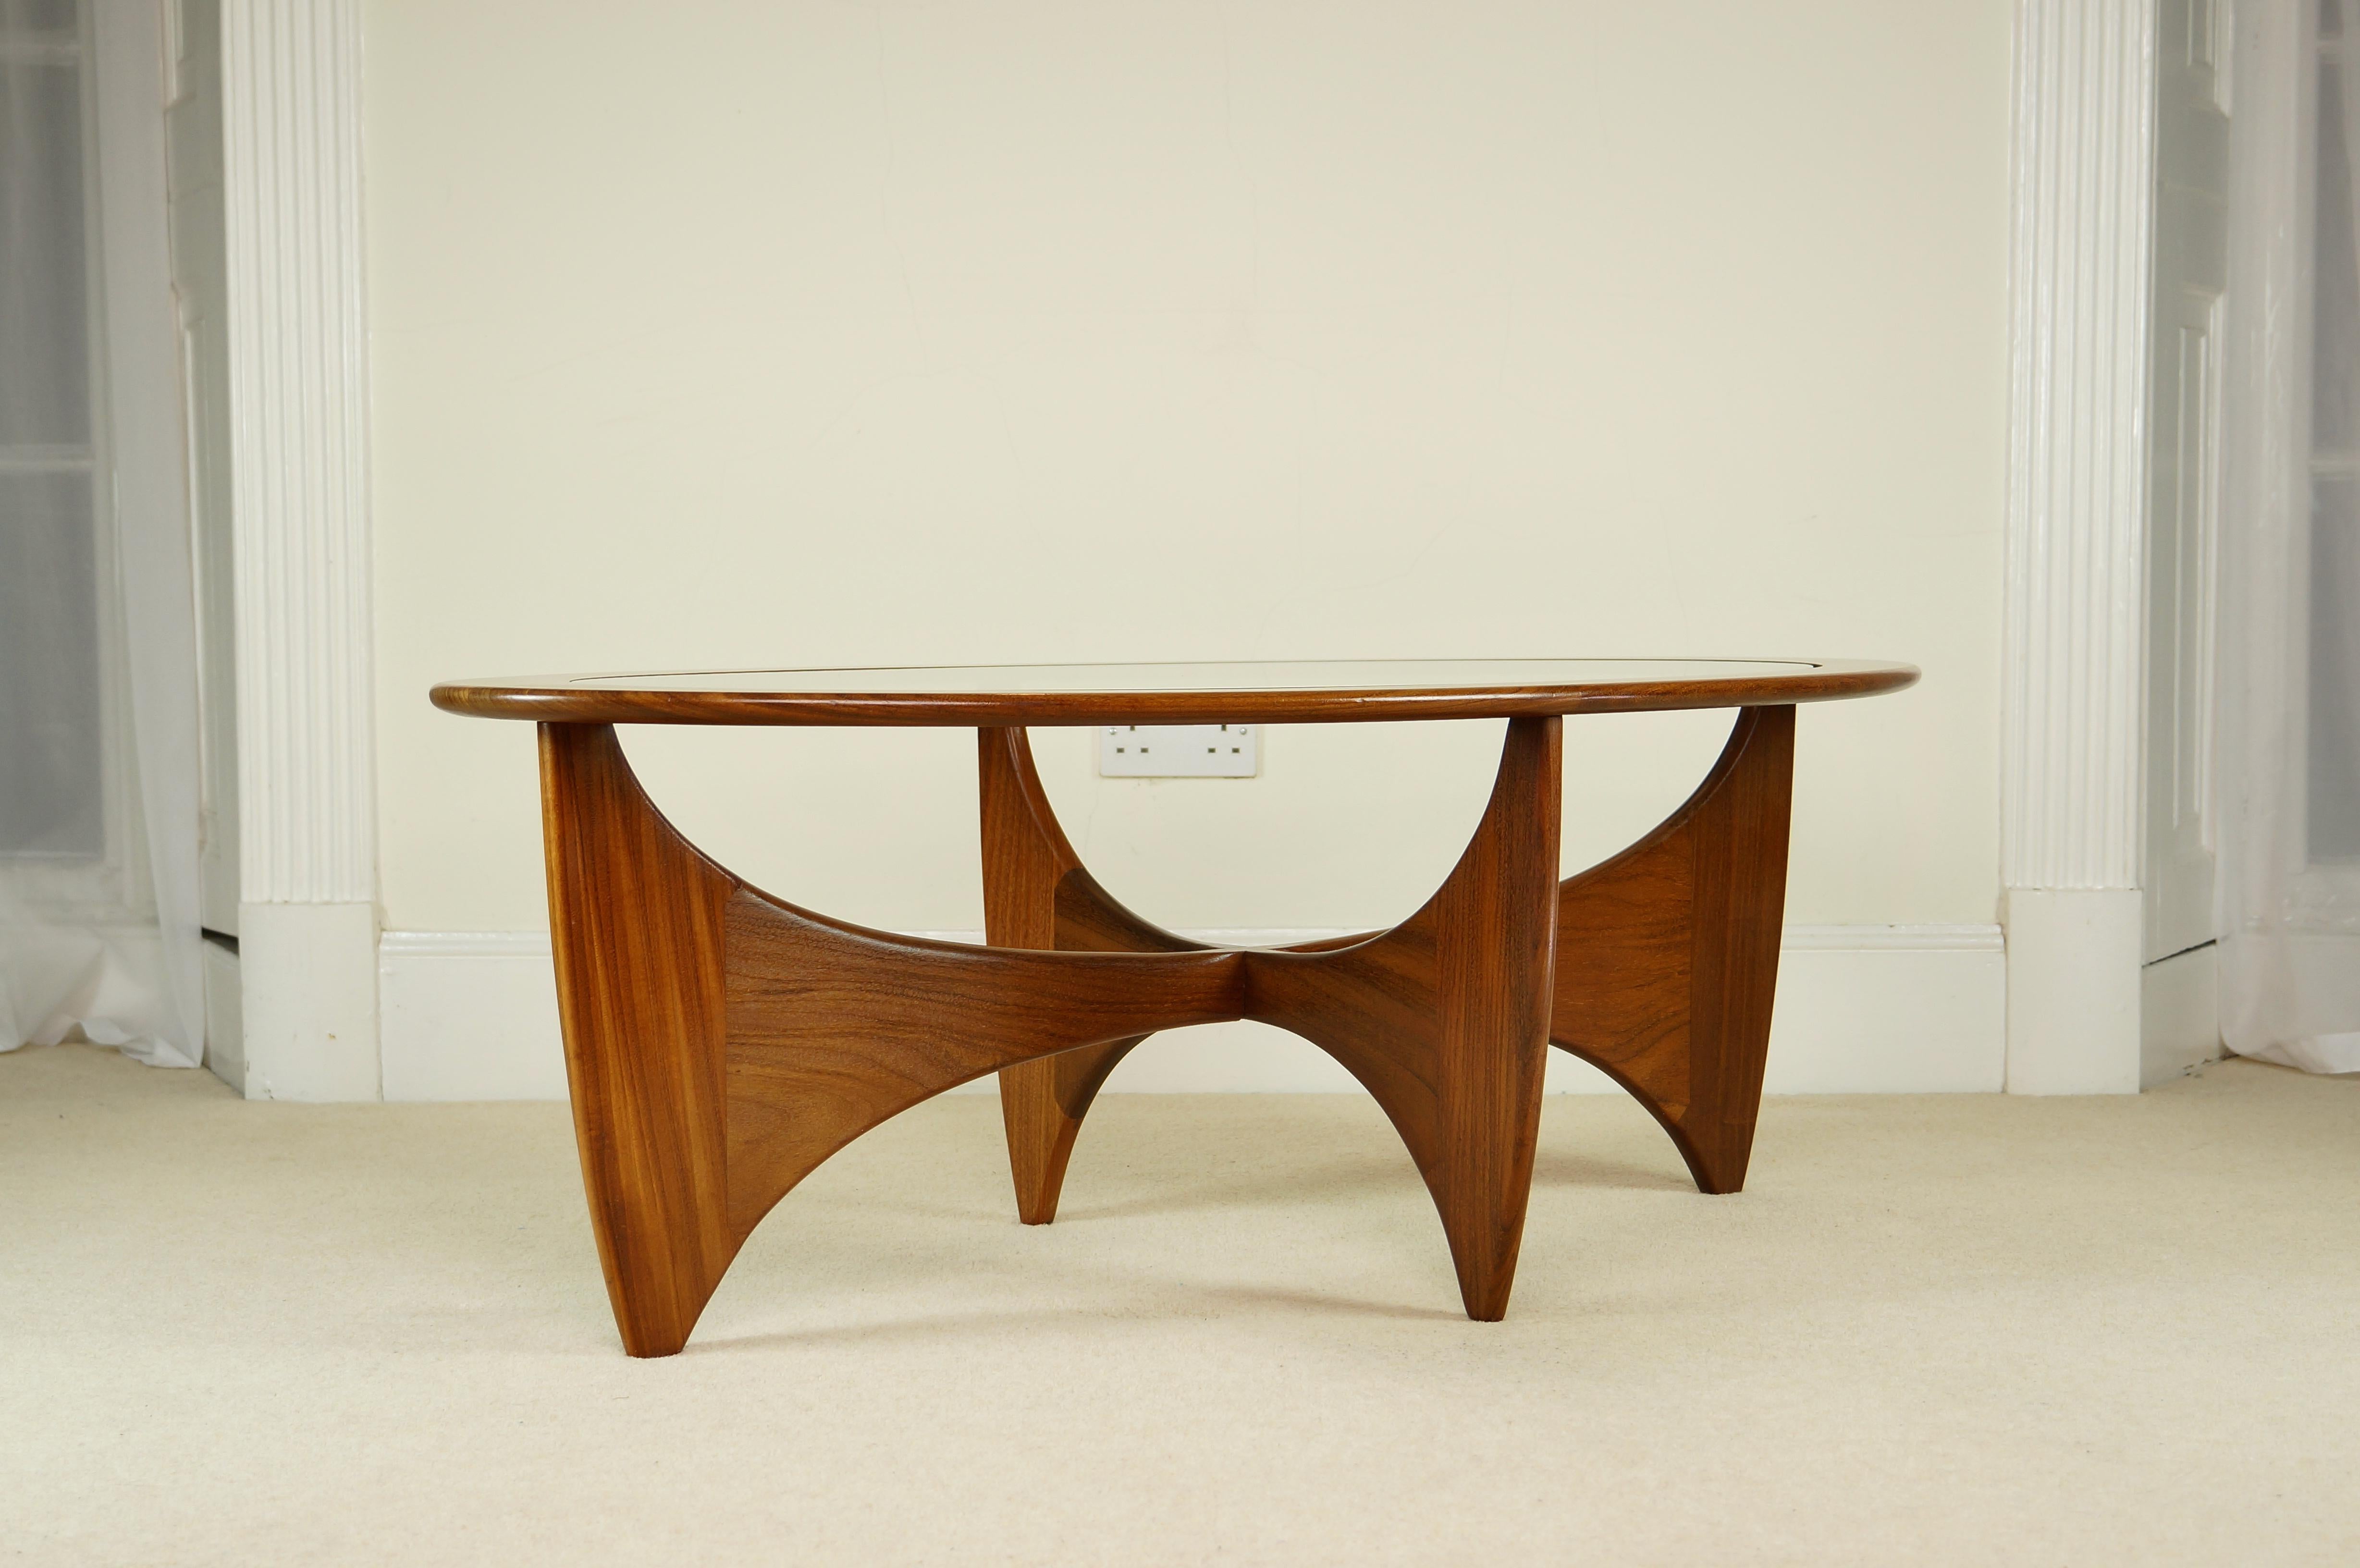 Vintage G Plan astro coffee table

A gorgeous example of this design by V B Wilkins for G Plan from the 1960's, retaining it's original label.

The sculptural solid teak frame is of high quality construction and shows fantastic grain with a